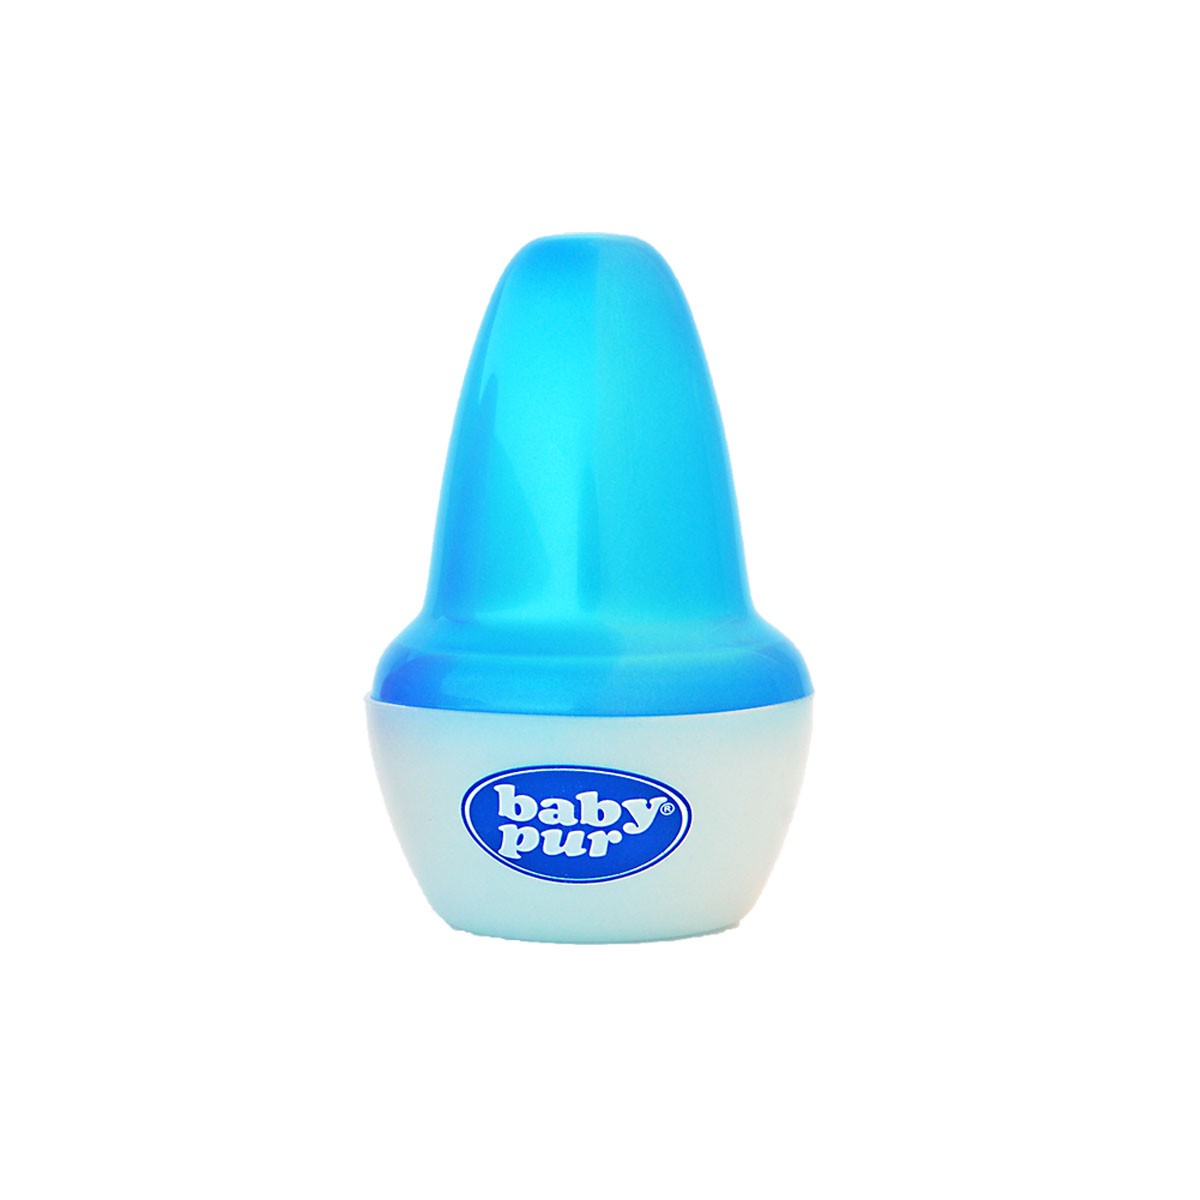 BABY PUR SUCETTE A SUCRE SILICONE